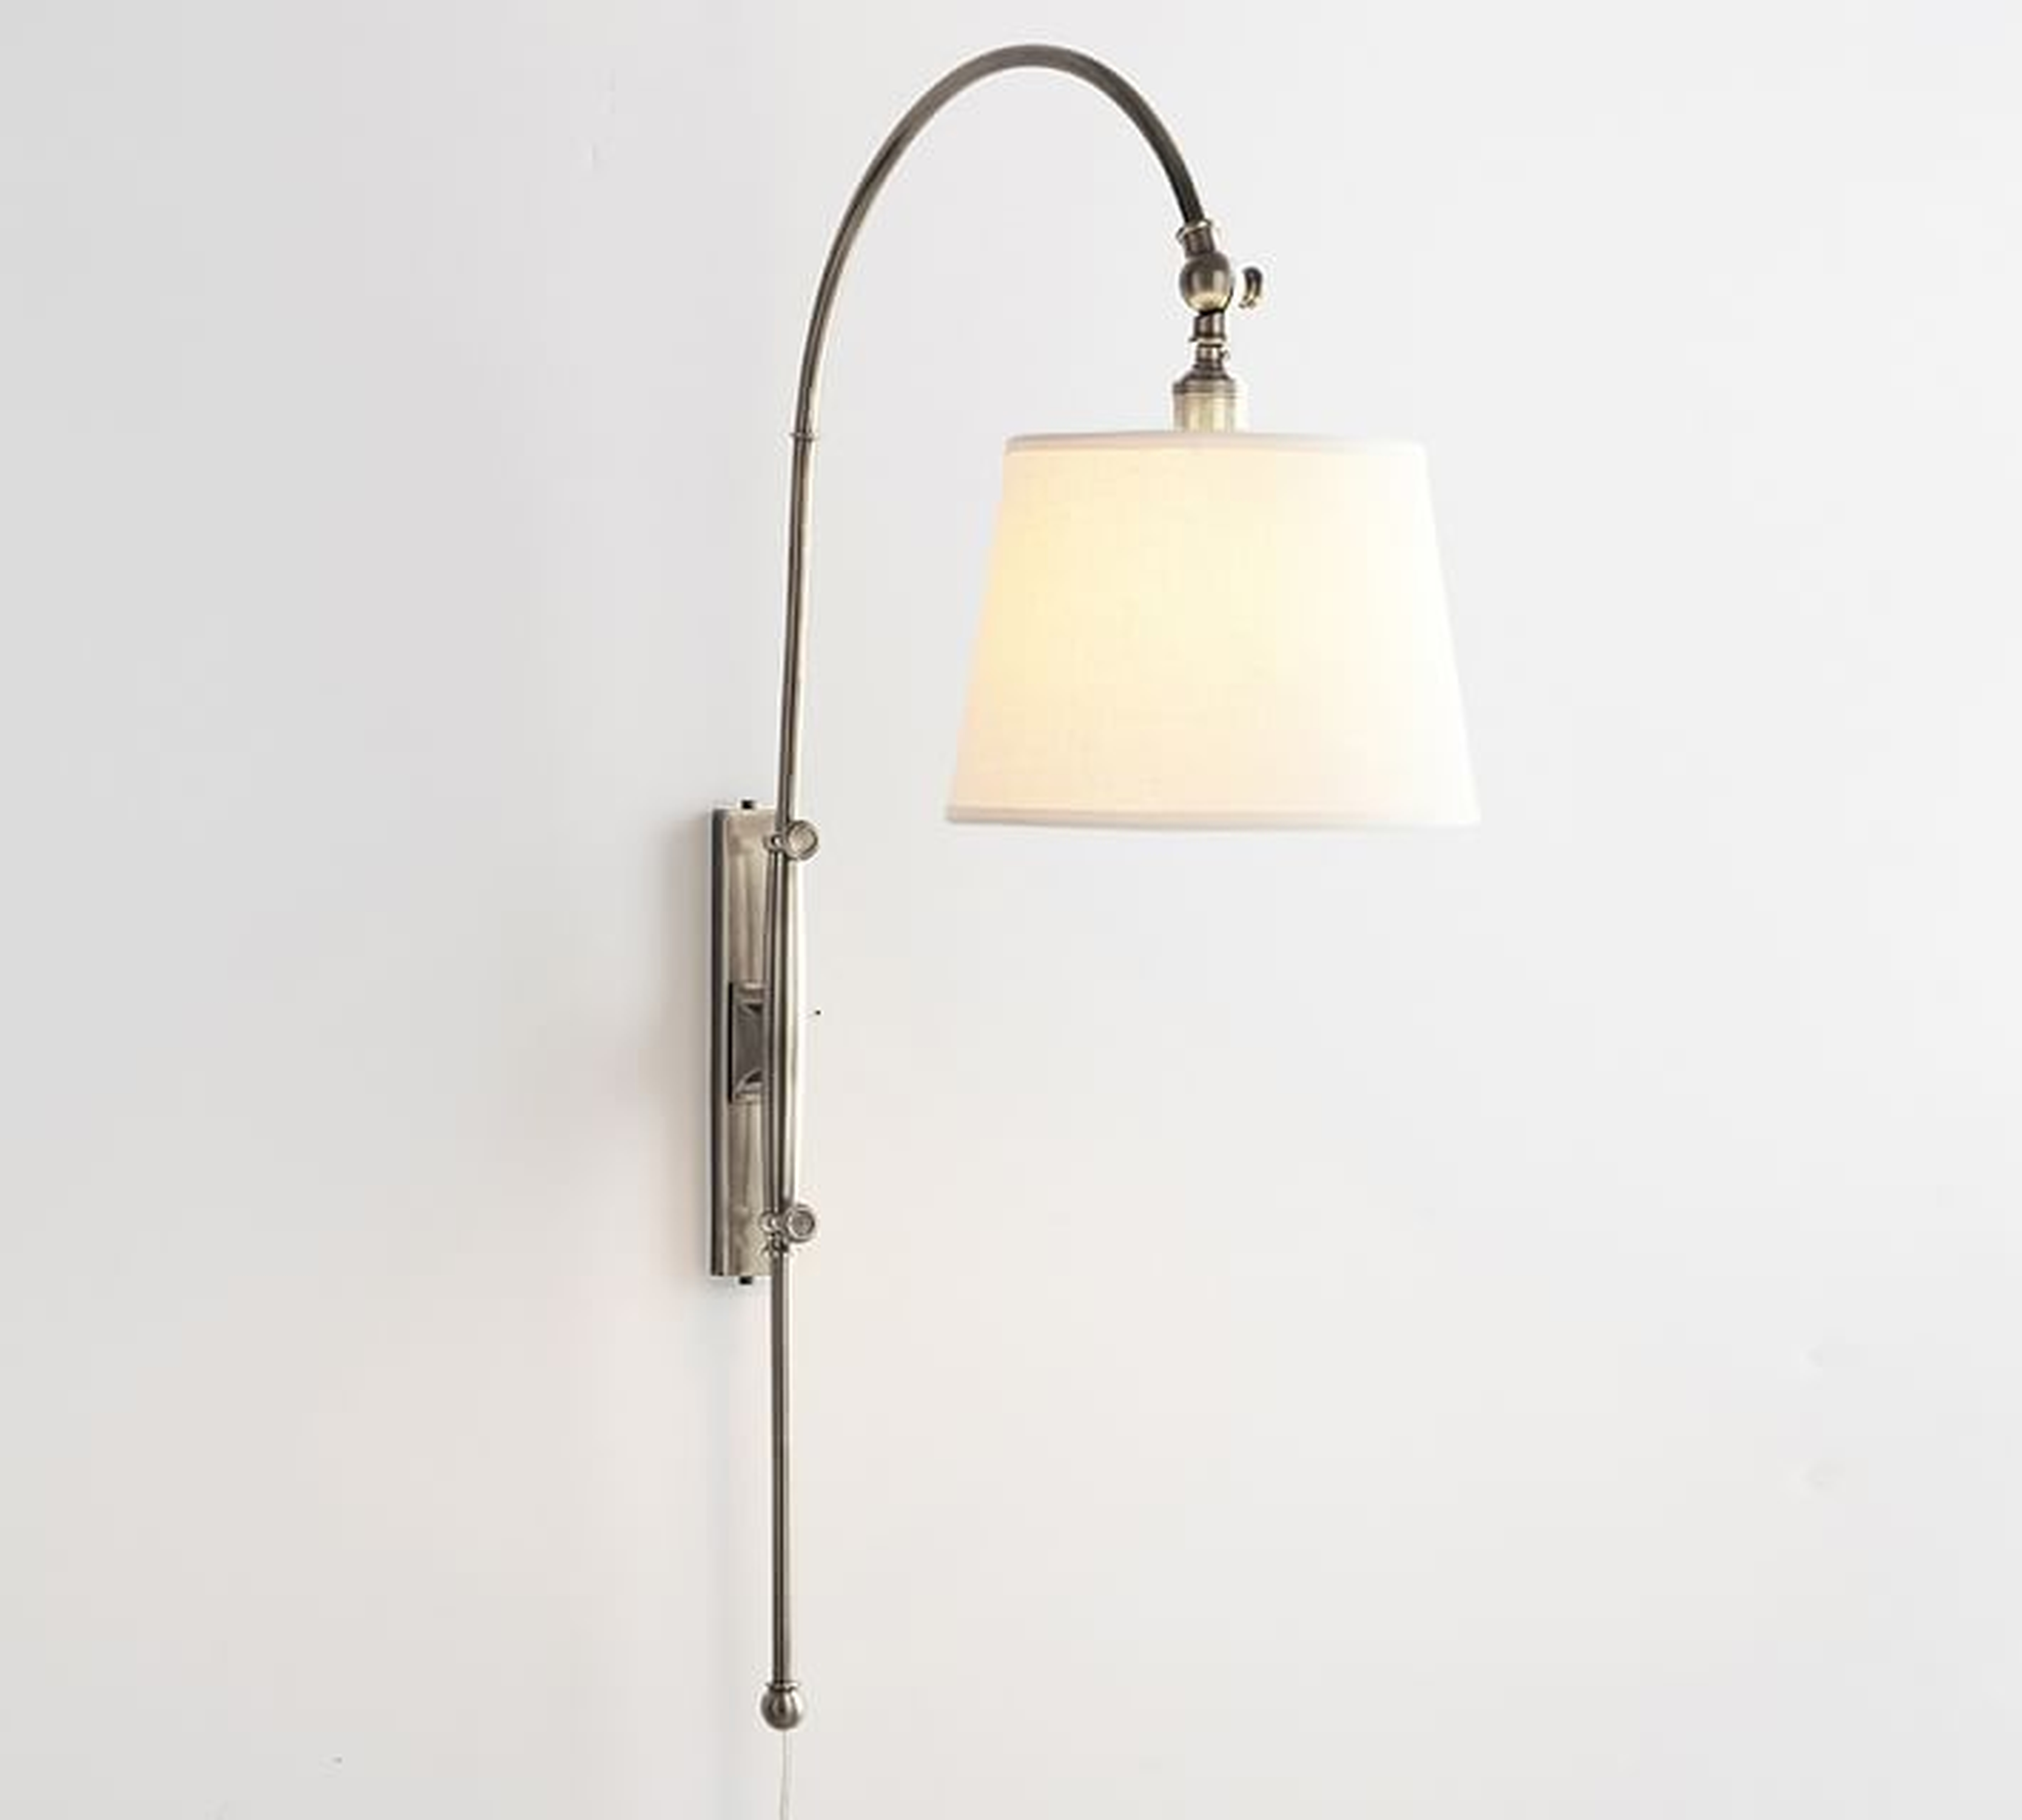 CFL Adjustable Arc Plug-in Sconce with White Shade, Antique Nickel - Pottery Barn